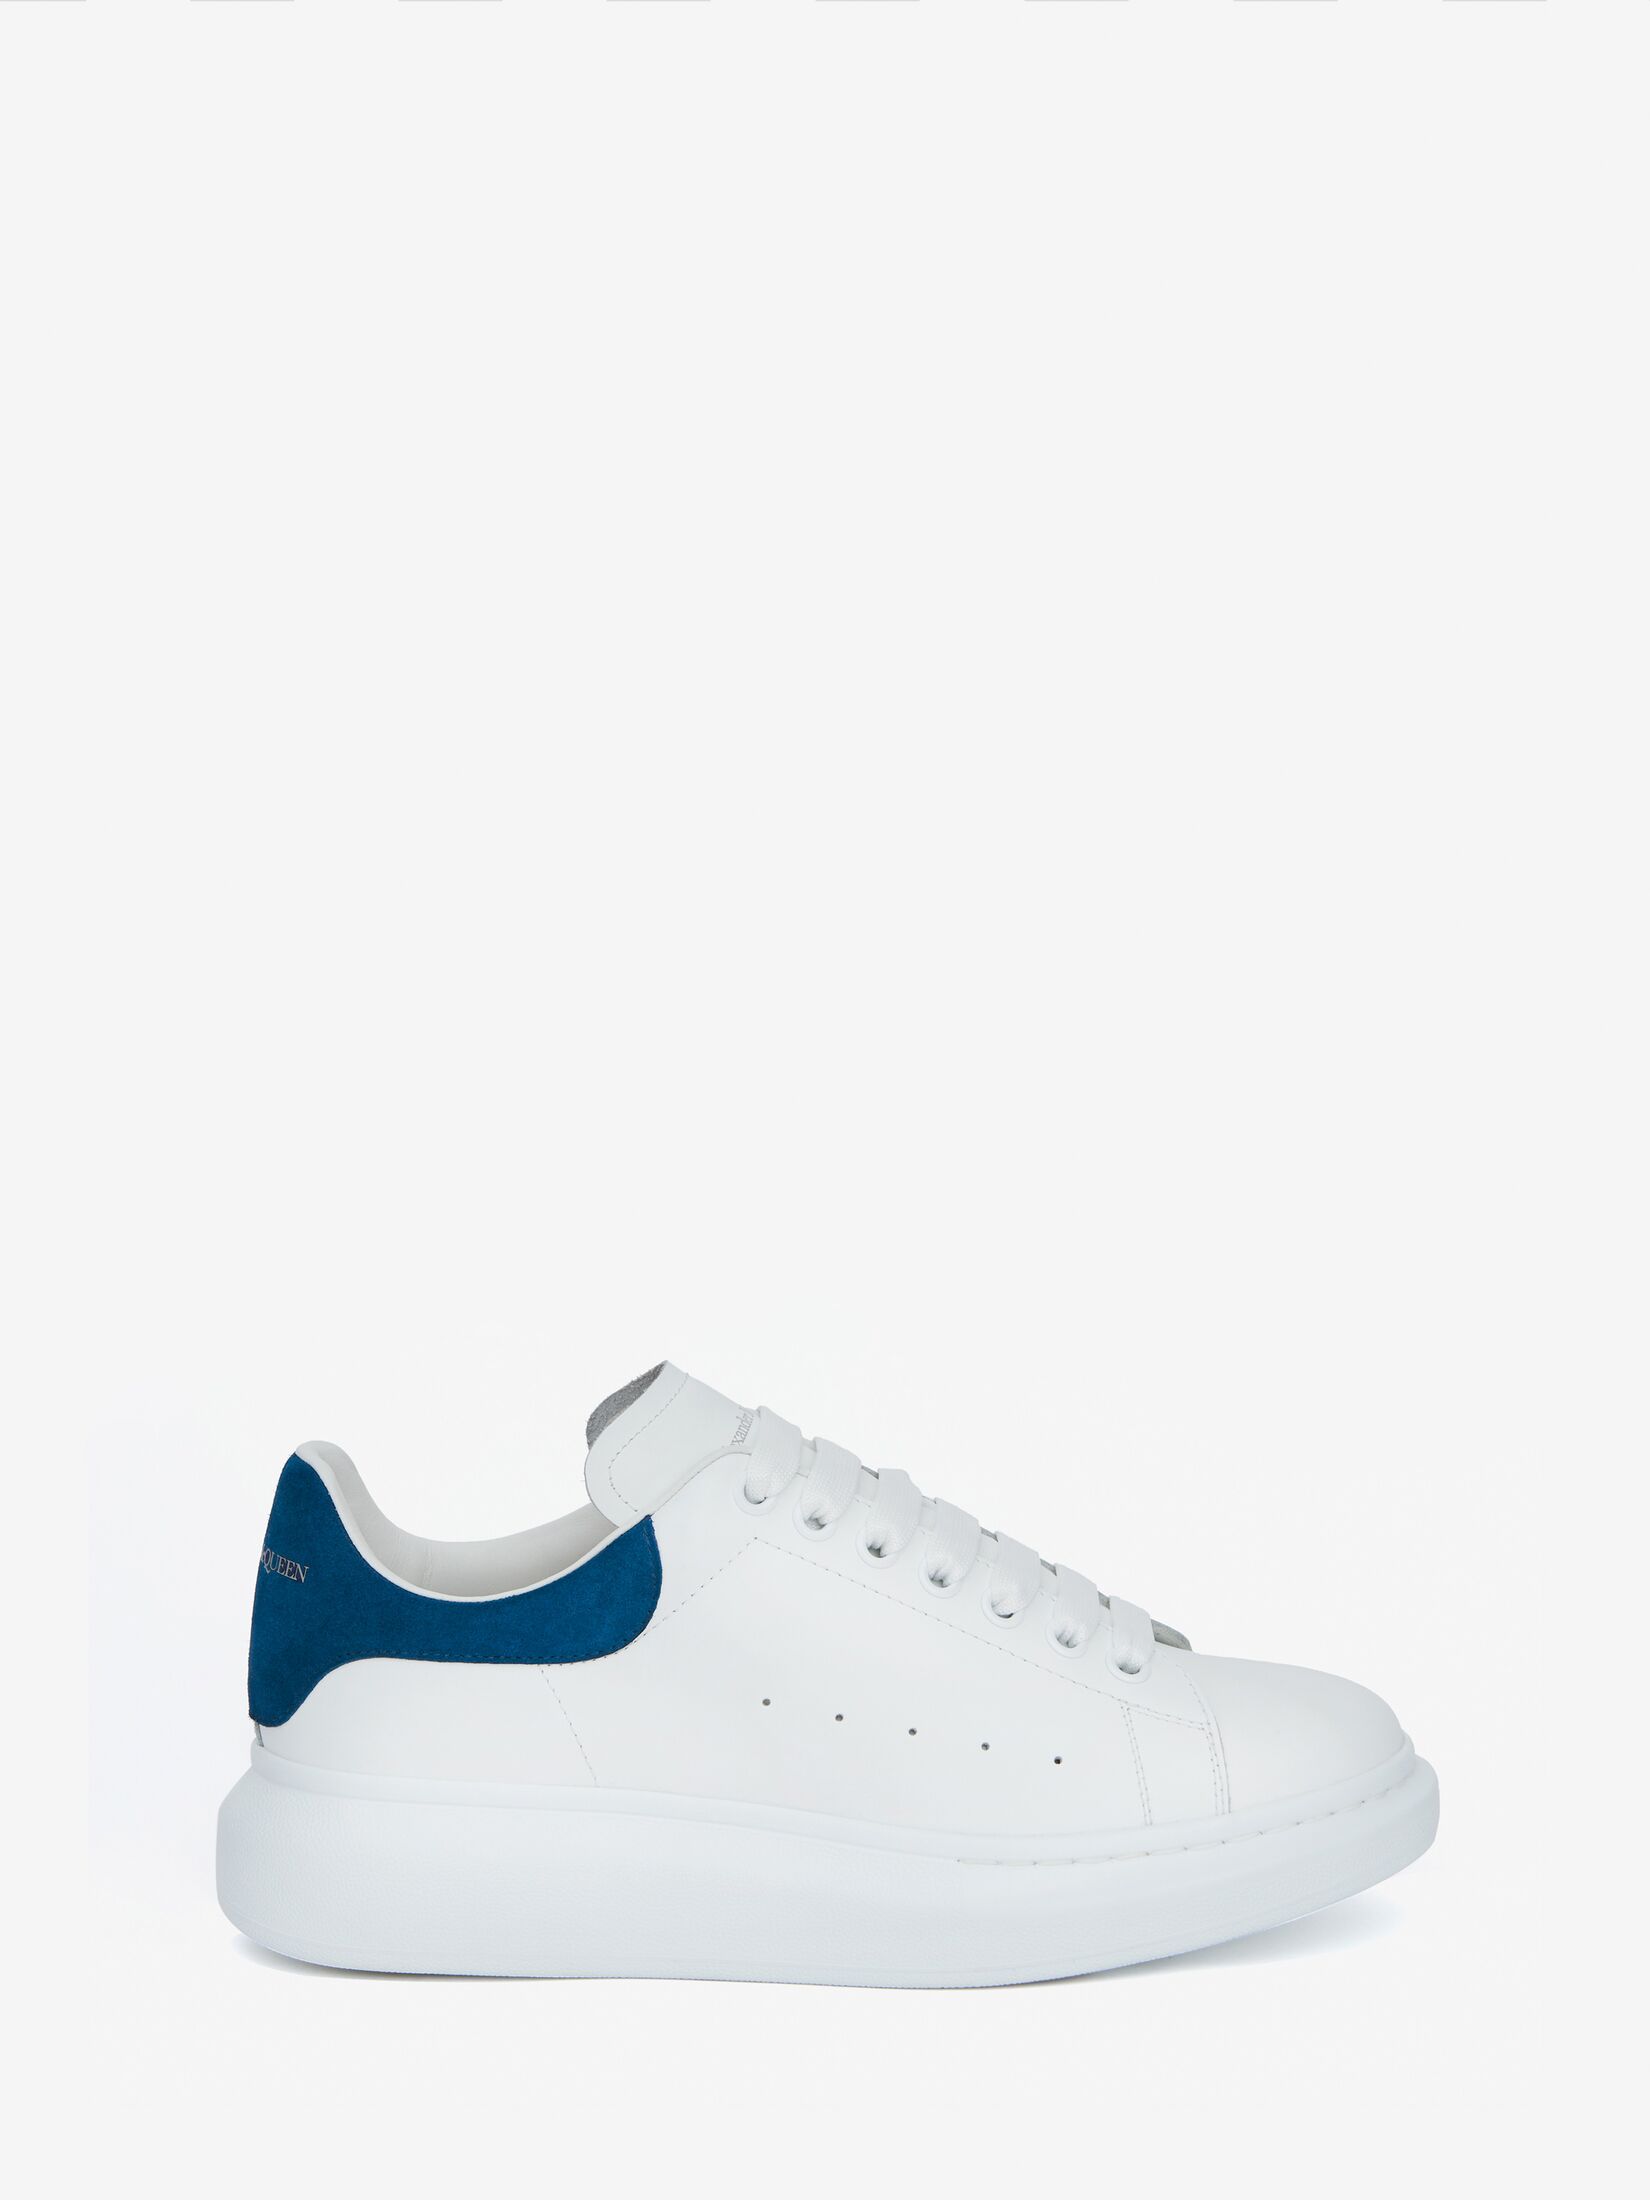 ALEXANDER MCQUEEN Matte and mirrored-leather exaggerated-sole sneakers |  NET-A-PORTER